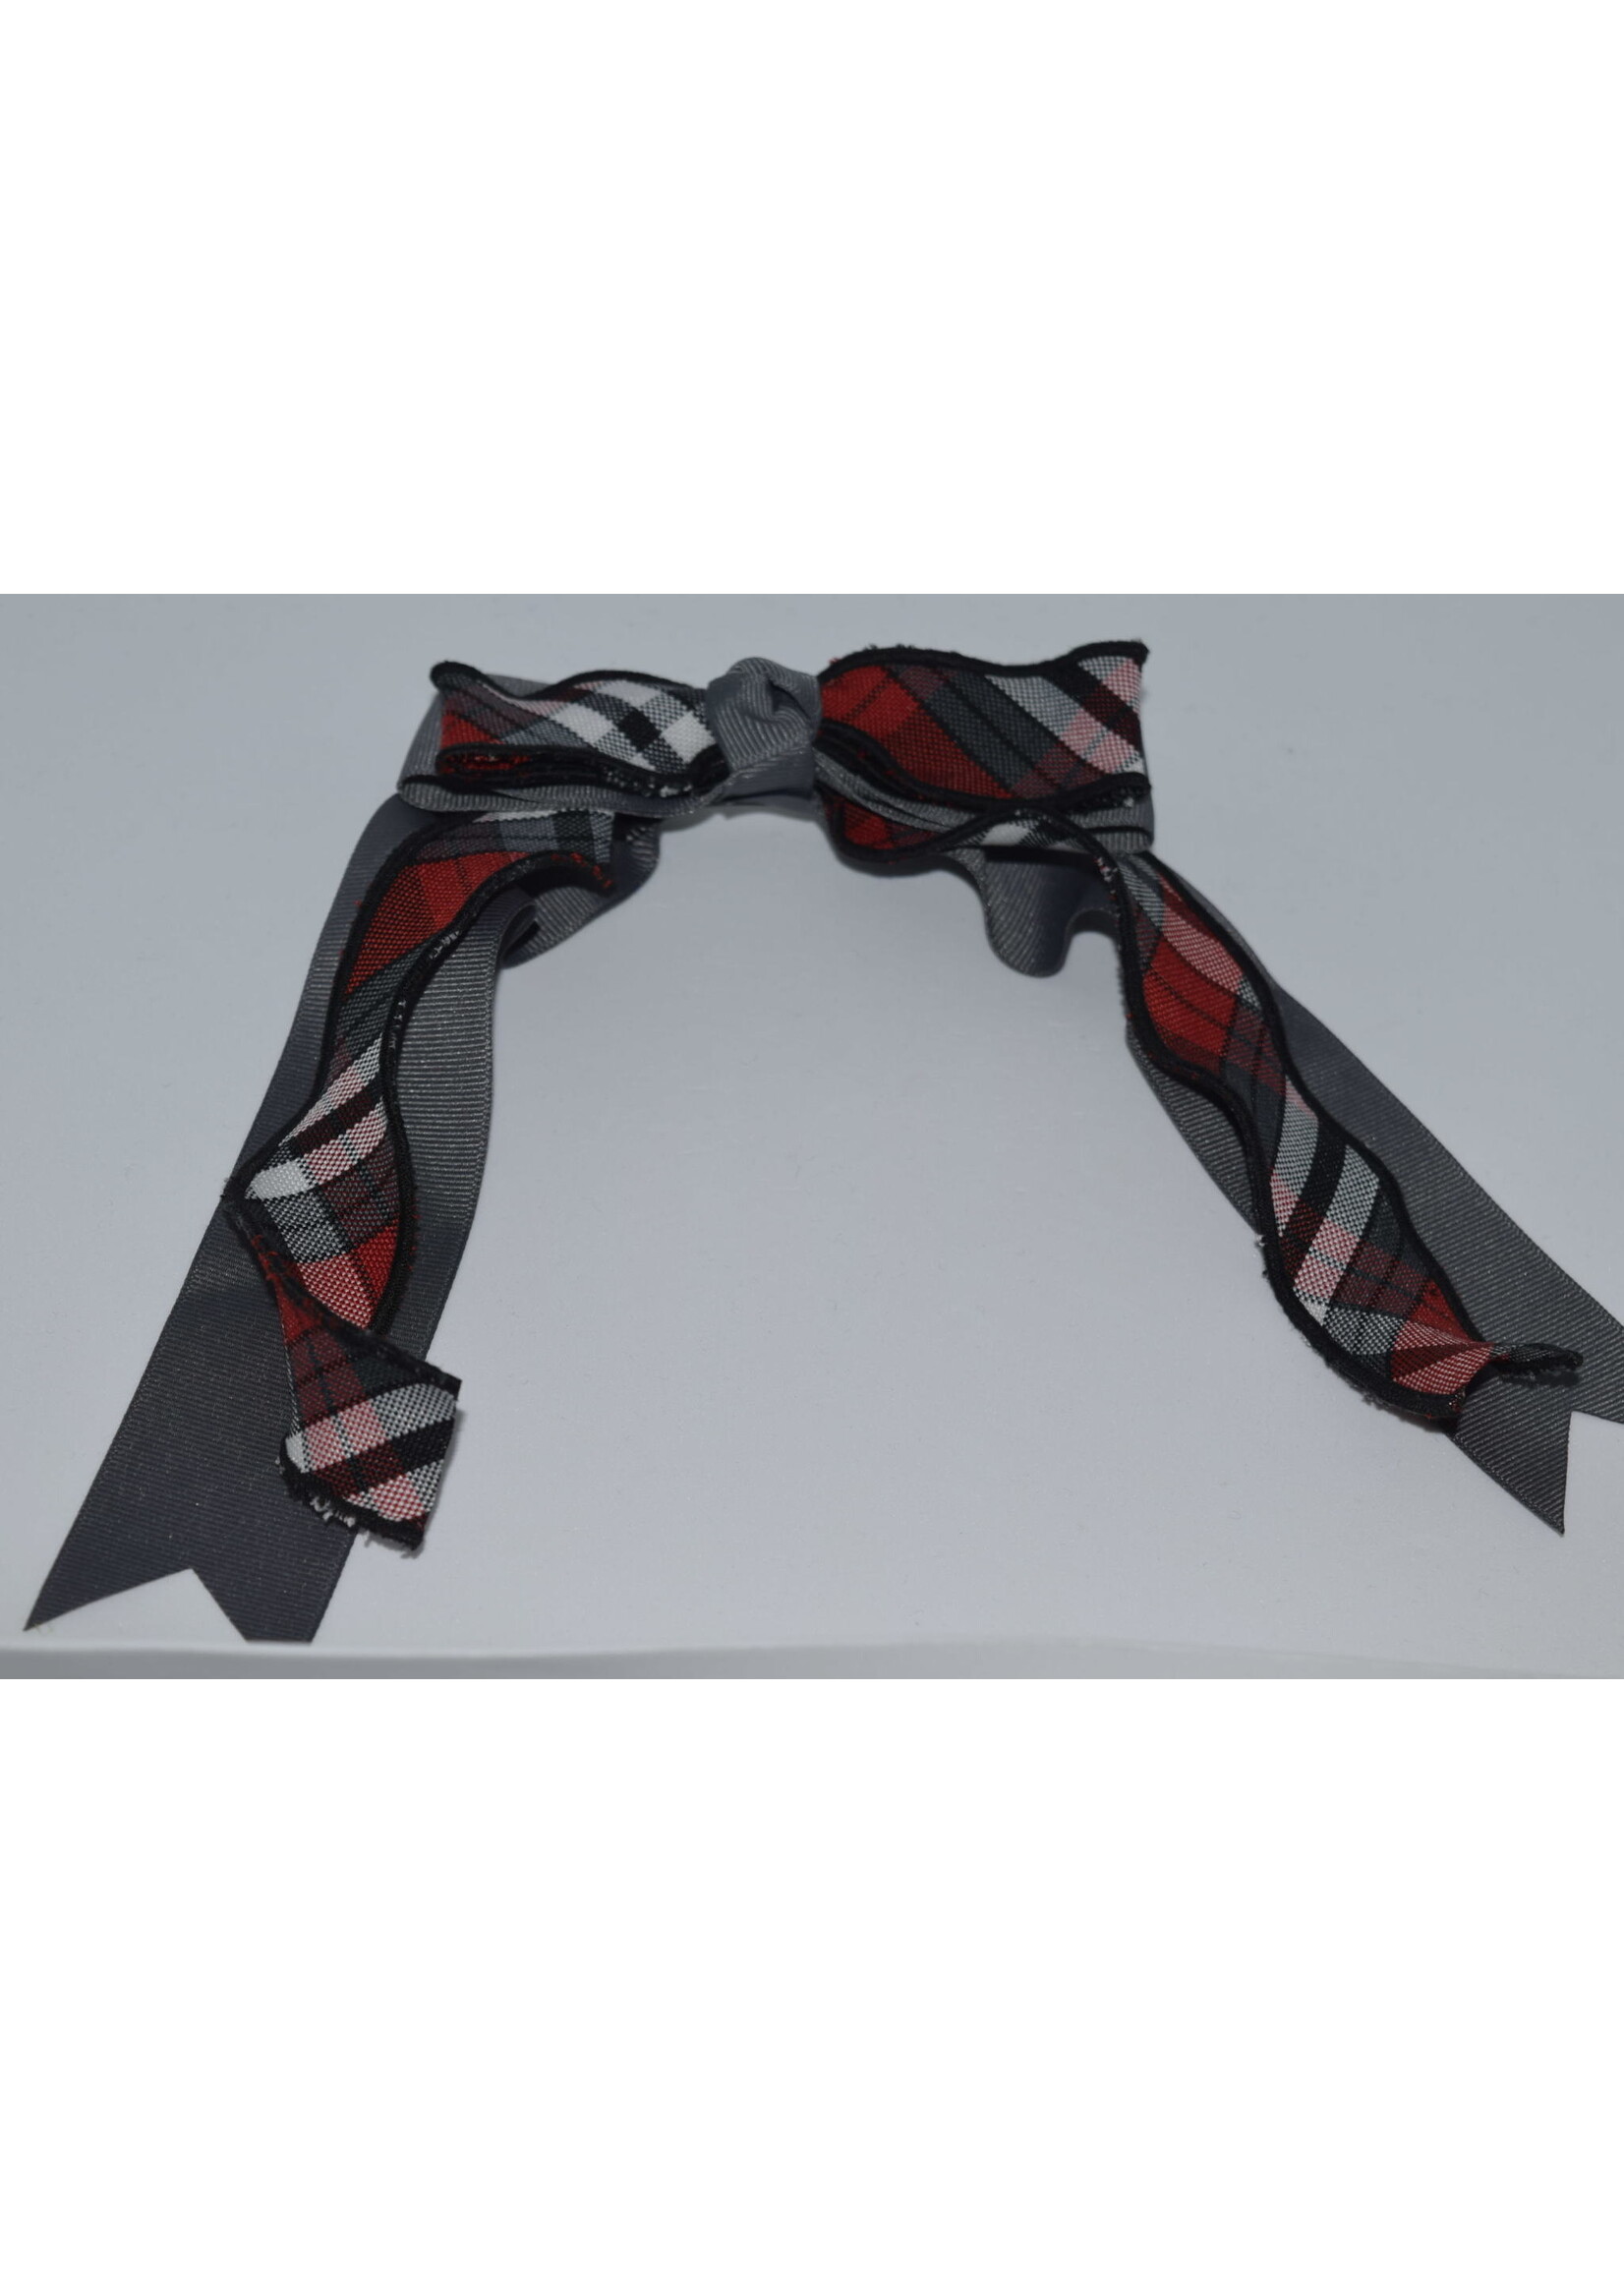 Large 2-layered plaid & grosgrain ribbon bow w/tails P69 PWT